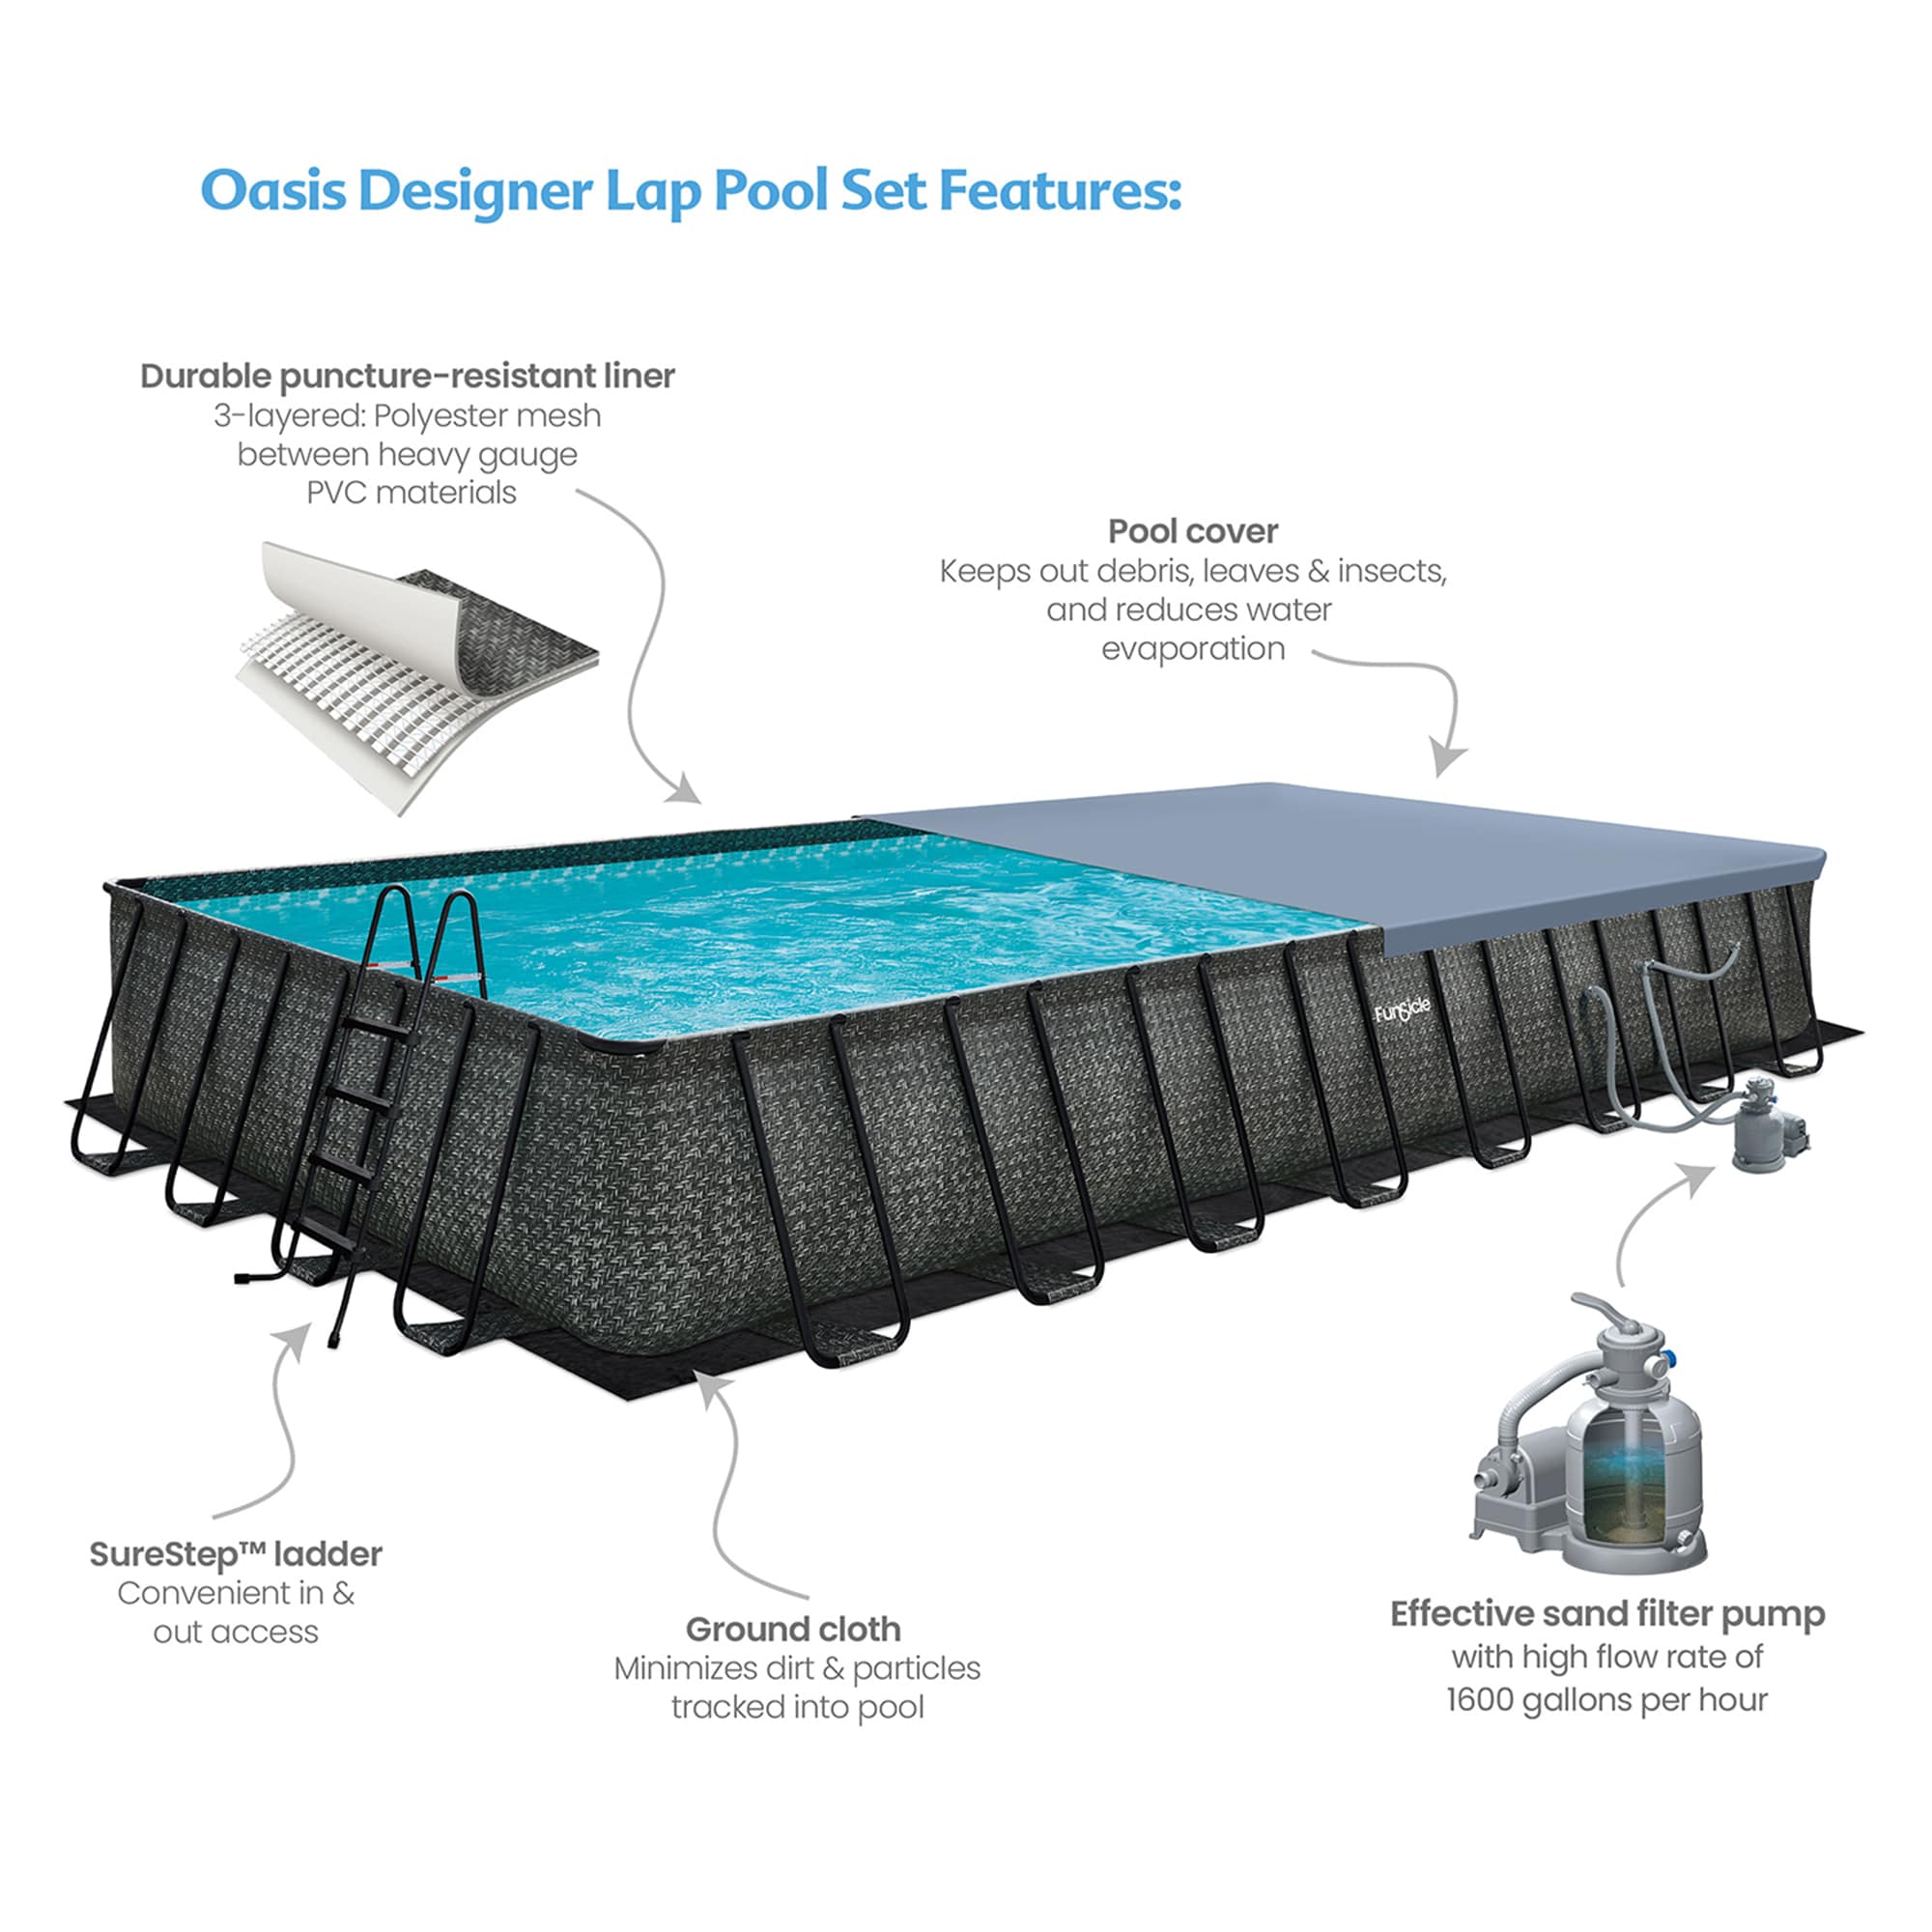 15' x 24' Oval Pool Leaf Net Cover - The Pool Factory